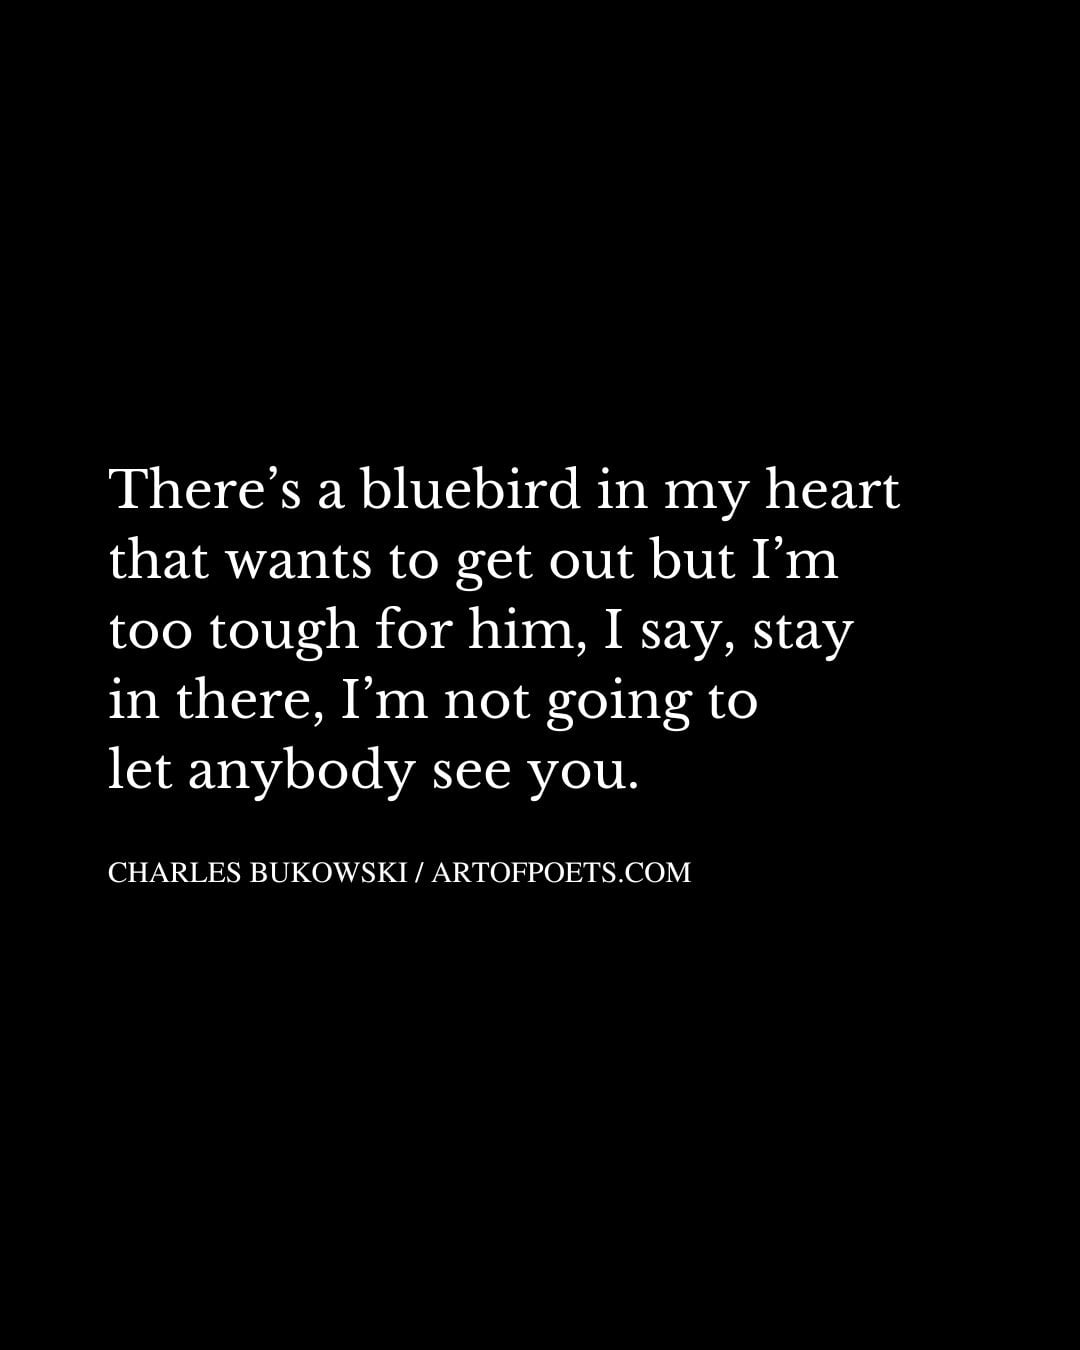 Theres a bluebird in my heart that wants to get out but Im too tough for him